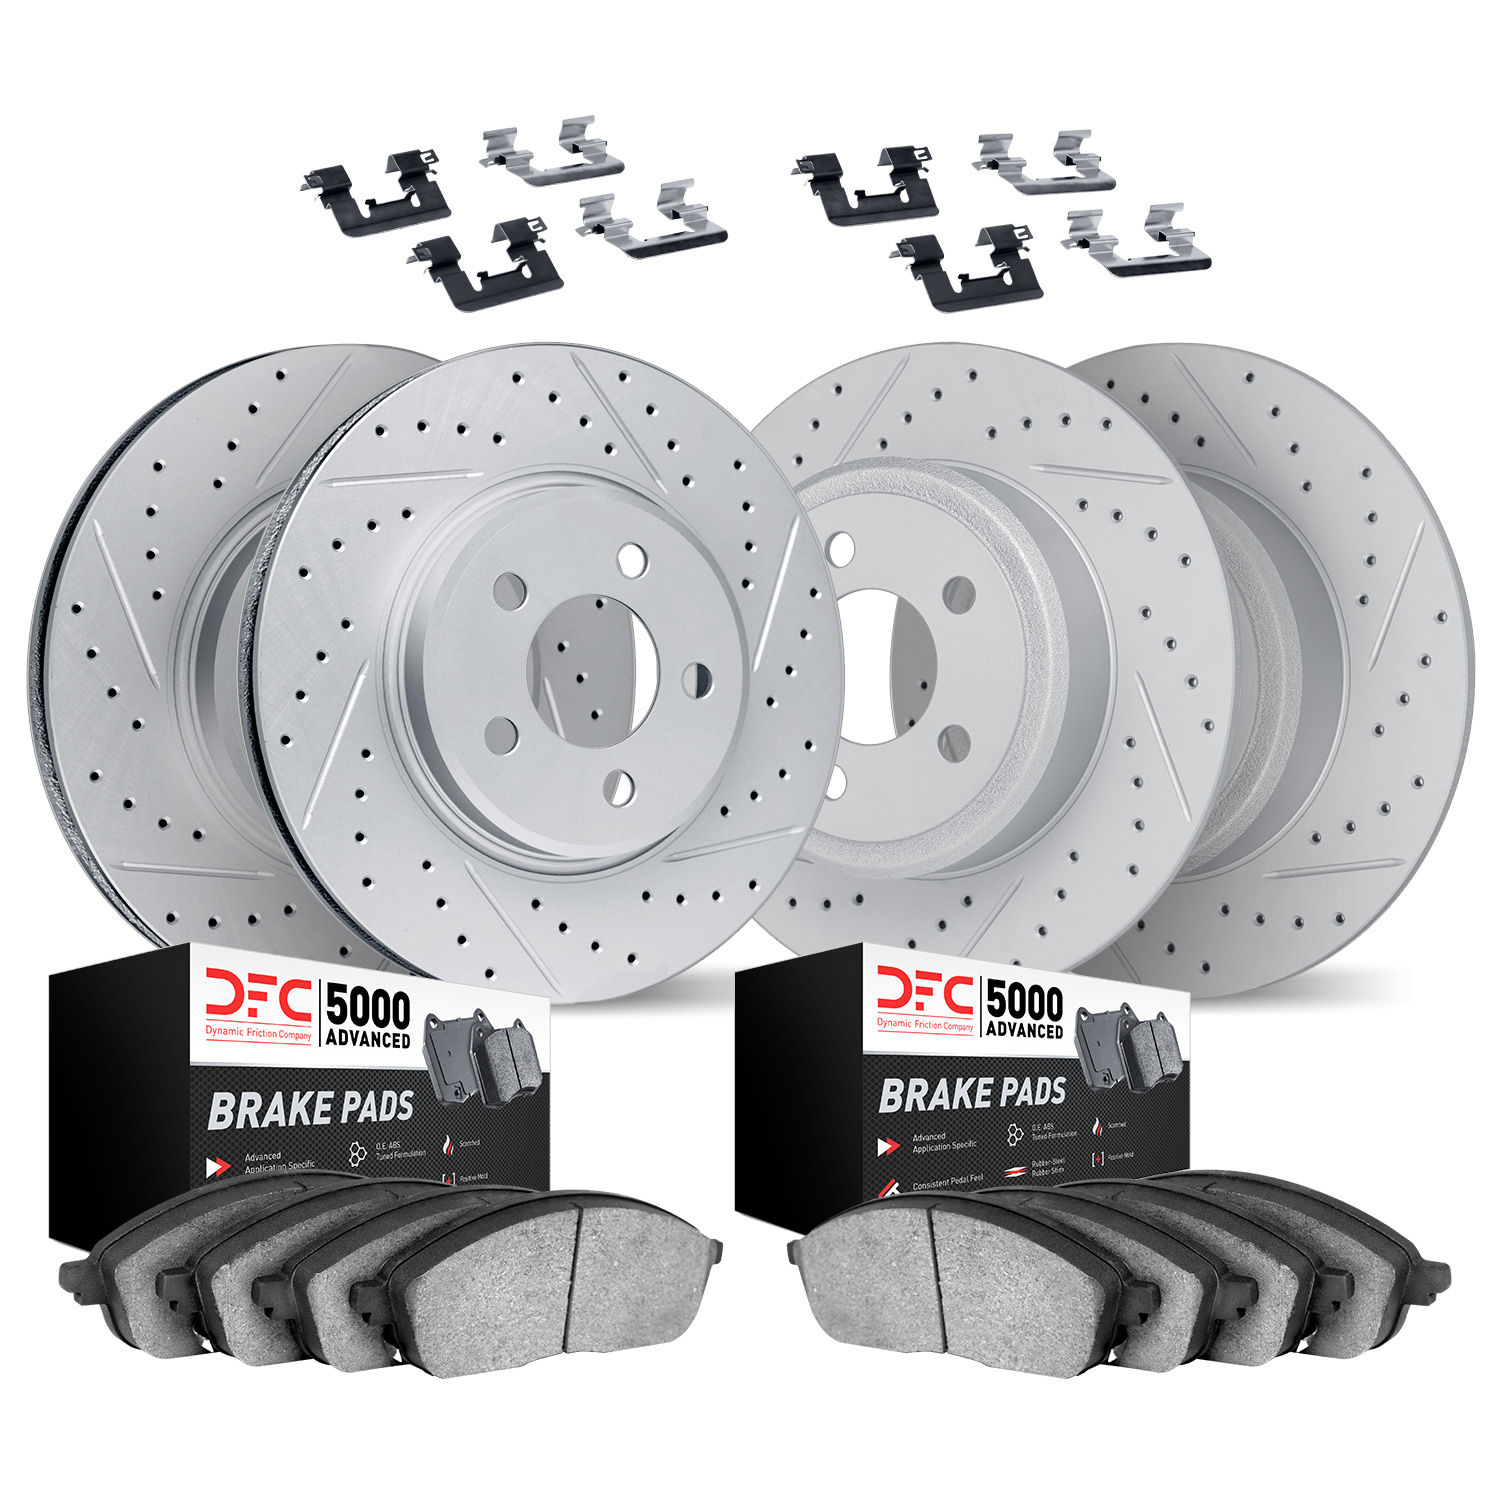 2514-58003 Geoperformance Drilled/Slotted Rotors w/5000 Advanced Brake Pads Kit & Hardware, 2017-2020 Acura/Honda, Position: Fro